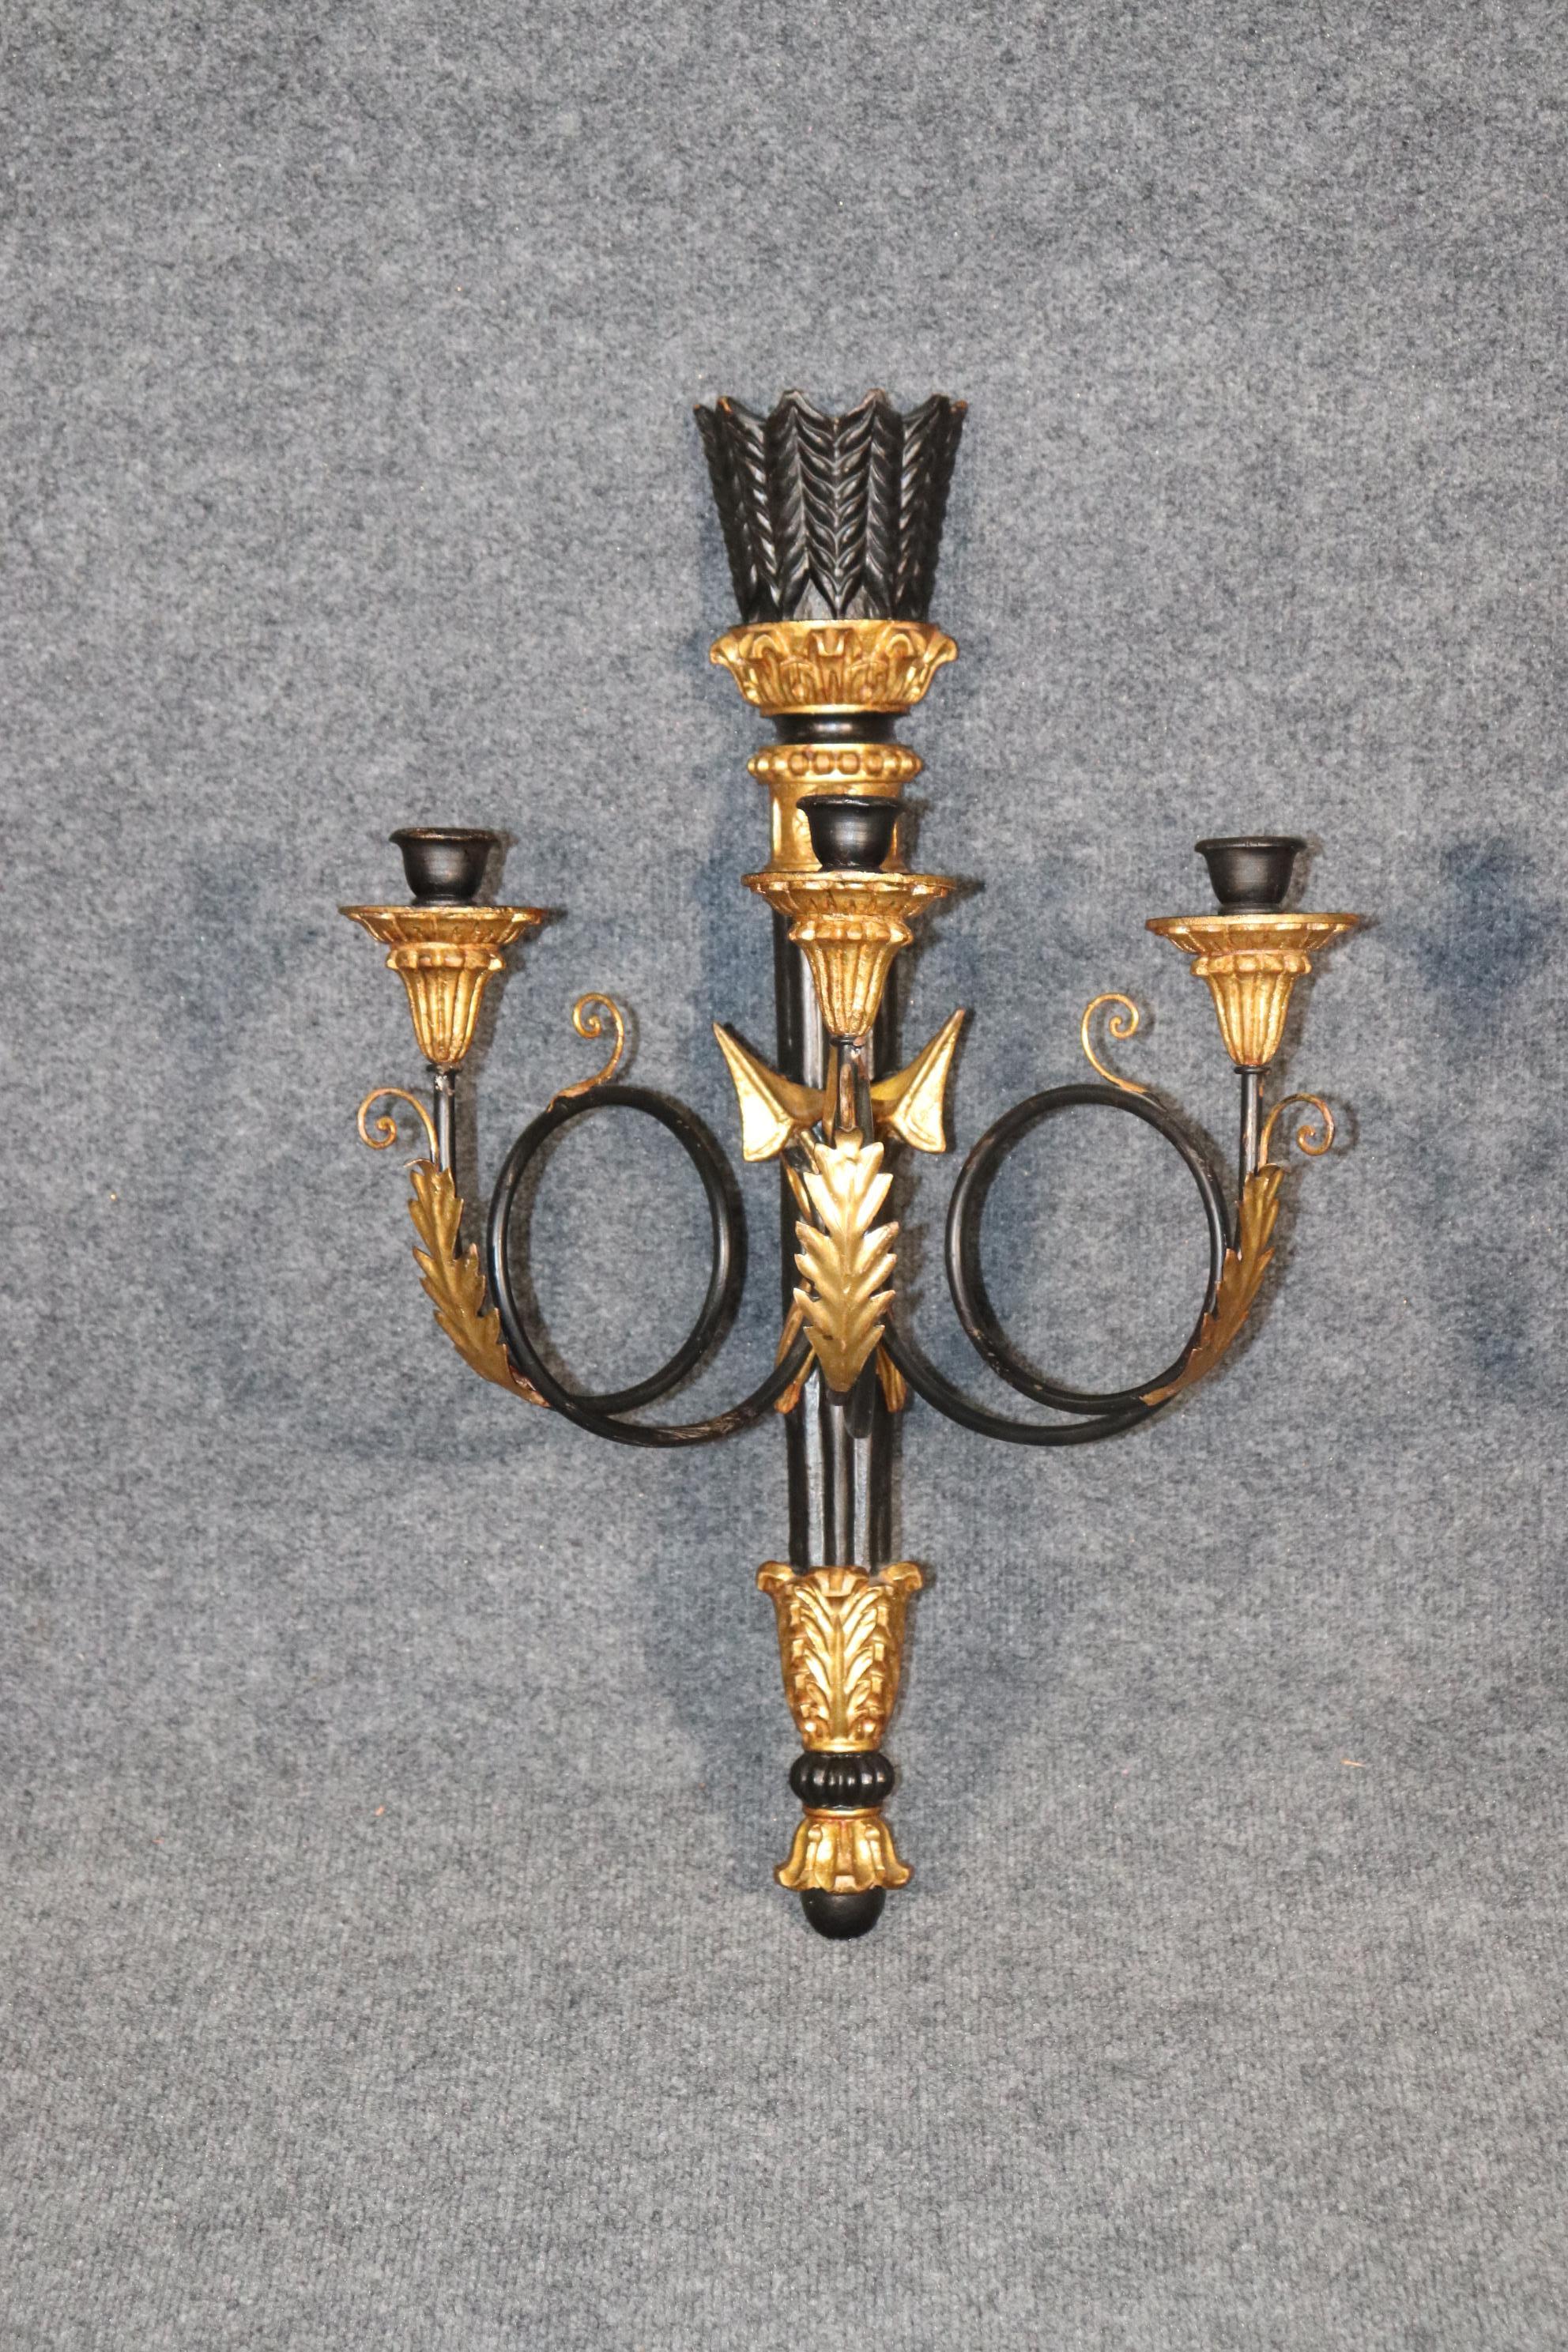 Dimensions: H: 25in W: 15.5in D: 10in
This pair of gilt Louis XVI Directoire style ebonized wall sconces are done beautifully and made of the finest quality. This Pair of sconces will add a touch of Sophistication and subtleness into every into